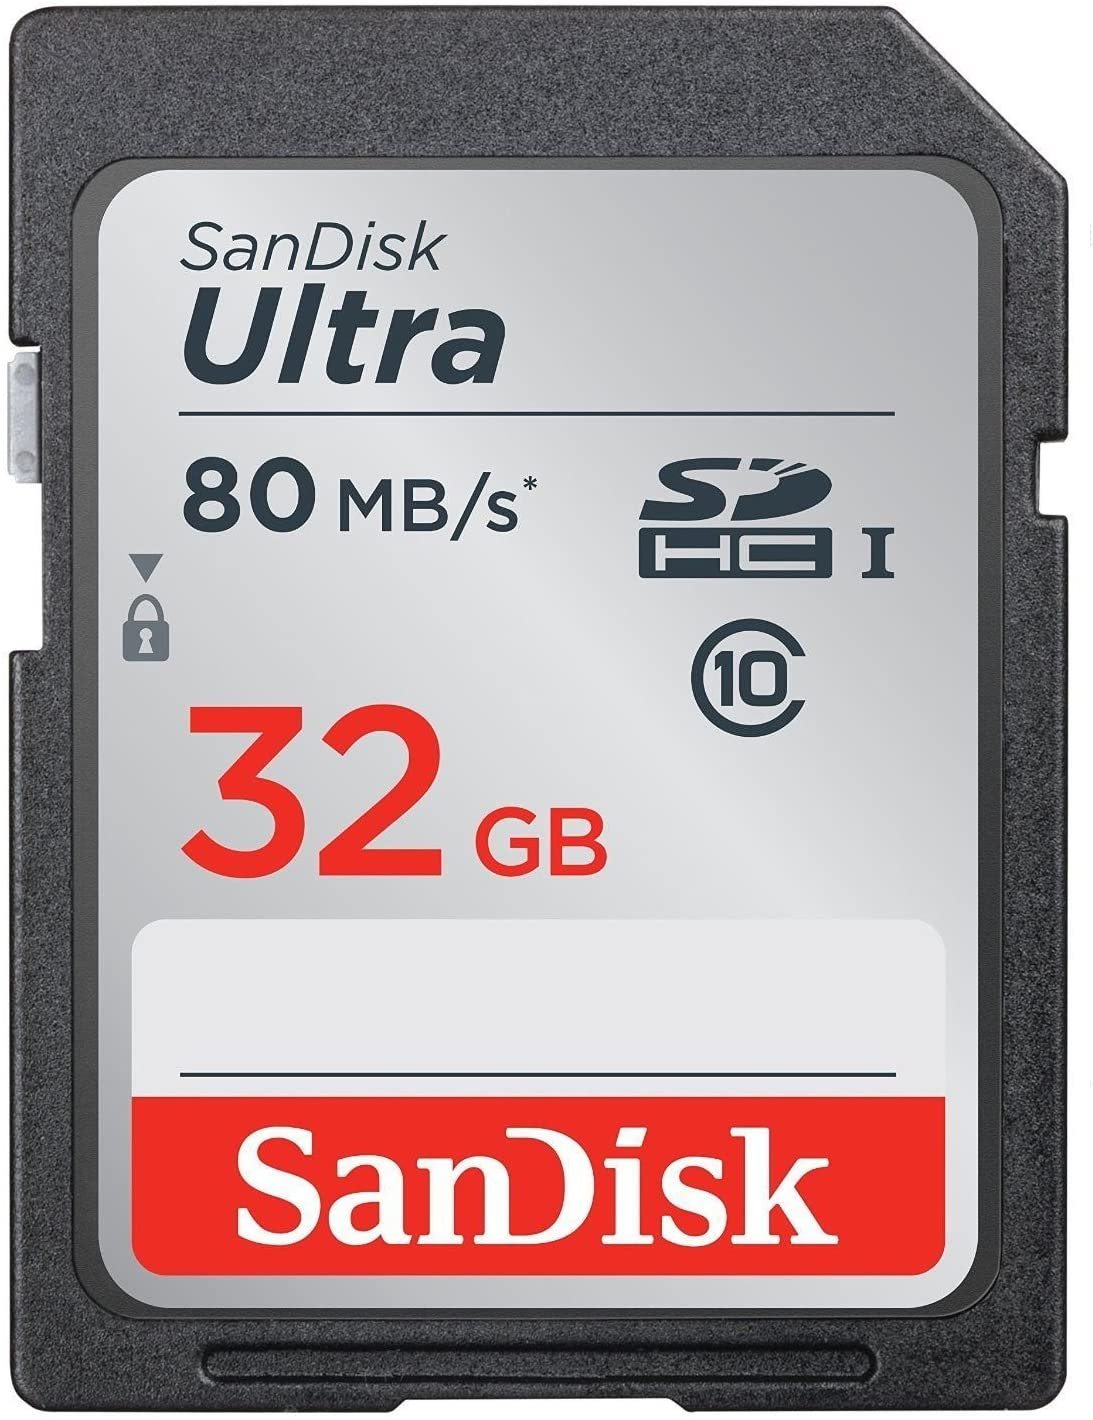 SanDisk Ultra 32GB Class 10 SDHC UHS-I Memory Card up to 80MB/s (SDSDUNC-032G-GN6IN) - image 1 of 3